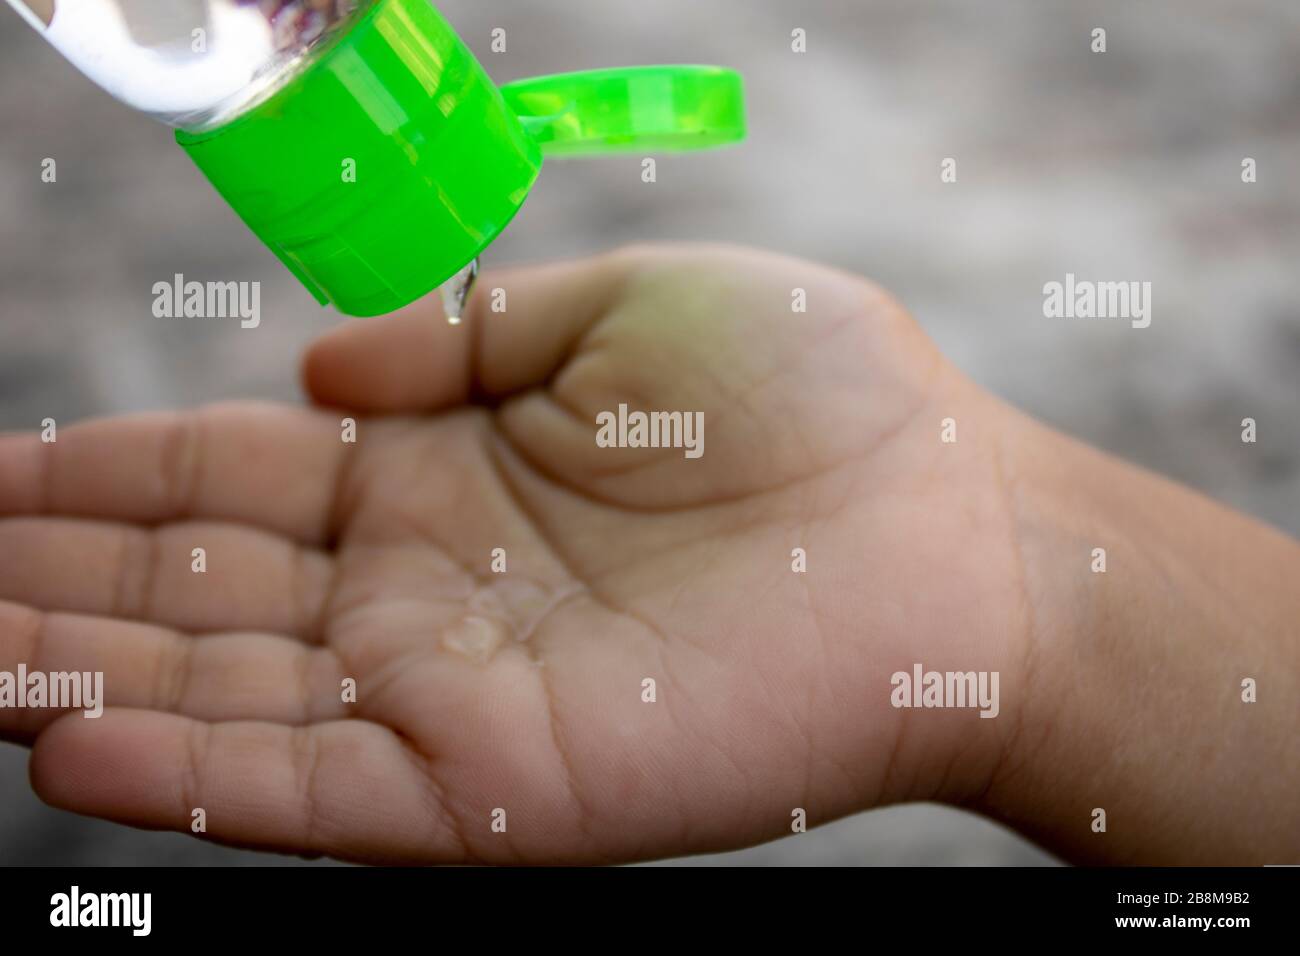 Cleaning hand with sanitizer for protection from virus Stock Photo